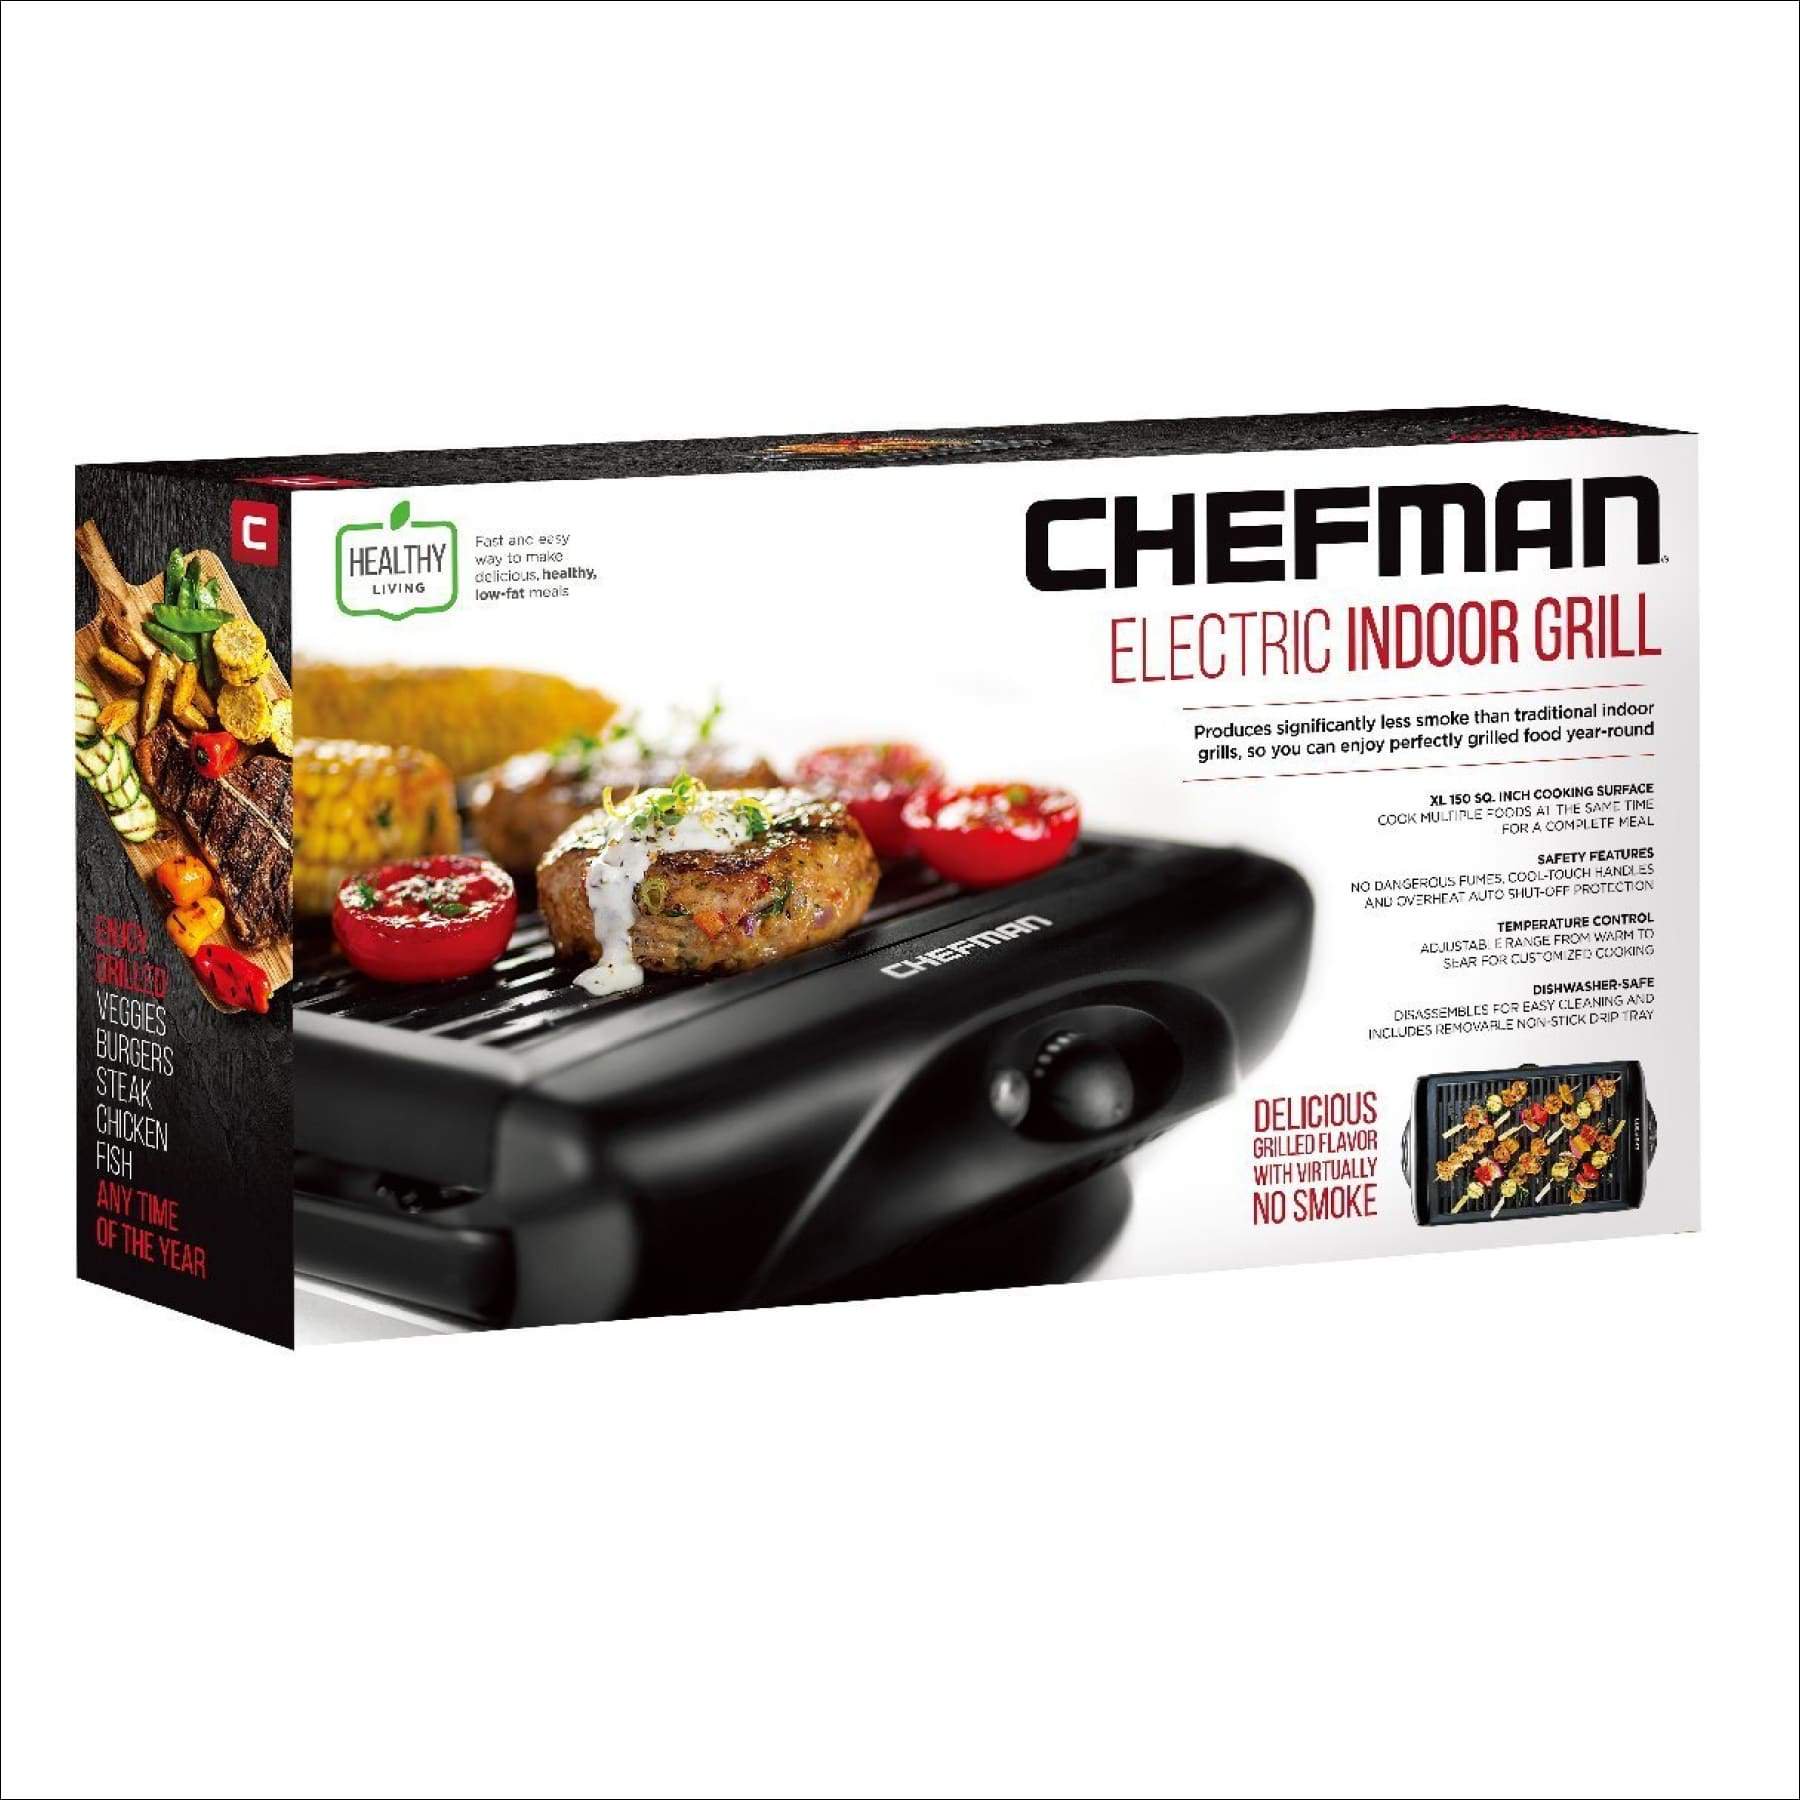 https://themarketdepot.com/wp-content/uploads/2023/01/Chefman-Electric-Smokeless-Indoor-Grill-w-Non-Stick-Cooking-Surface-Adjustable-Temperature-Knob-from-Warm-to-Sear-for-Customized-BBQ-Grilling-Dishwasher-Safe-Removable-Water-Tray-Black-1.jpeg